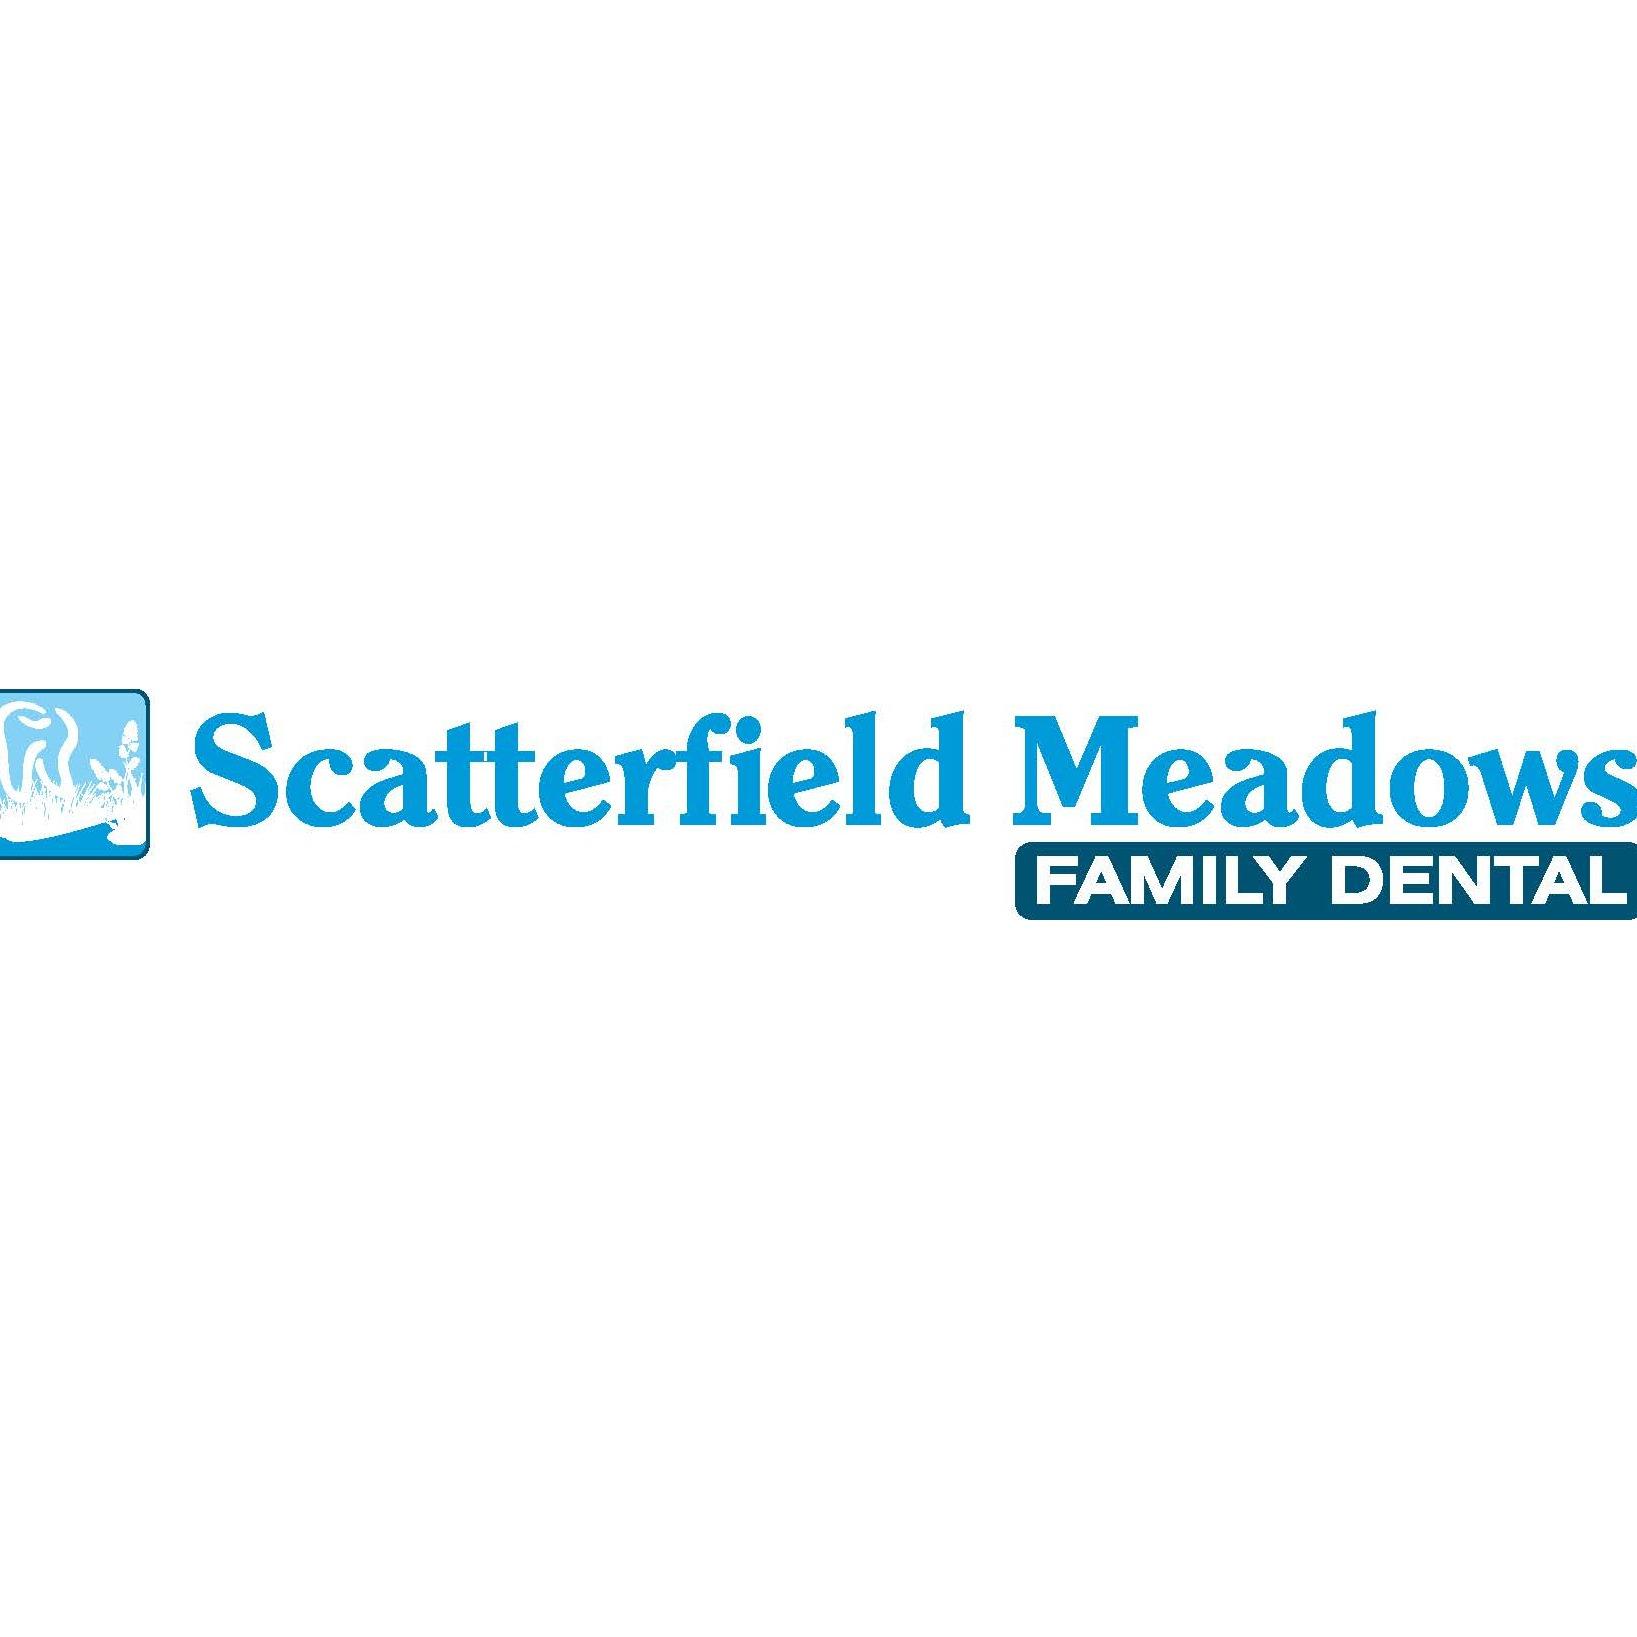 Scatterfield Meadows Family Dental - Anderson, IN 46013 - (765)374-3535 | ShowMeLocal.com